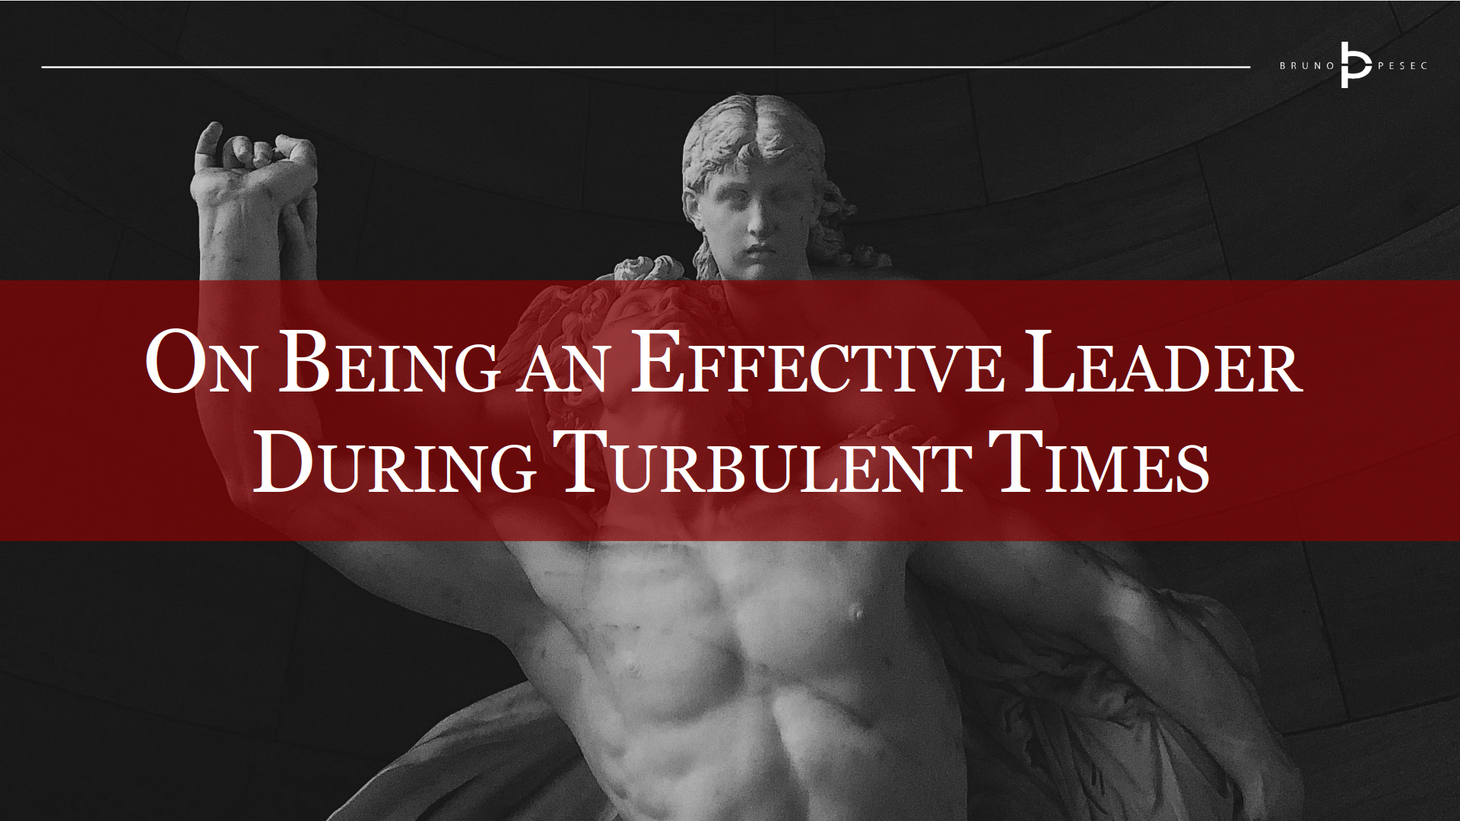 On being an effective leader during turbulent times